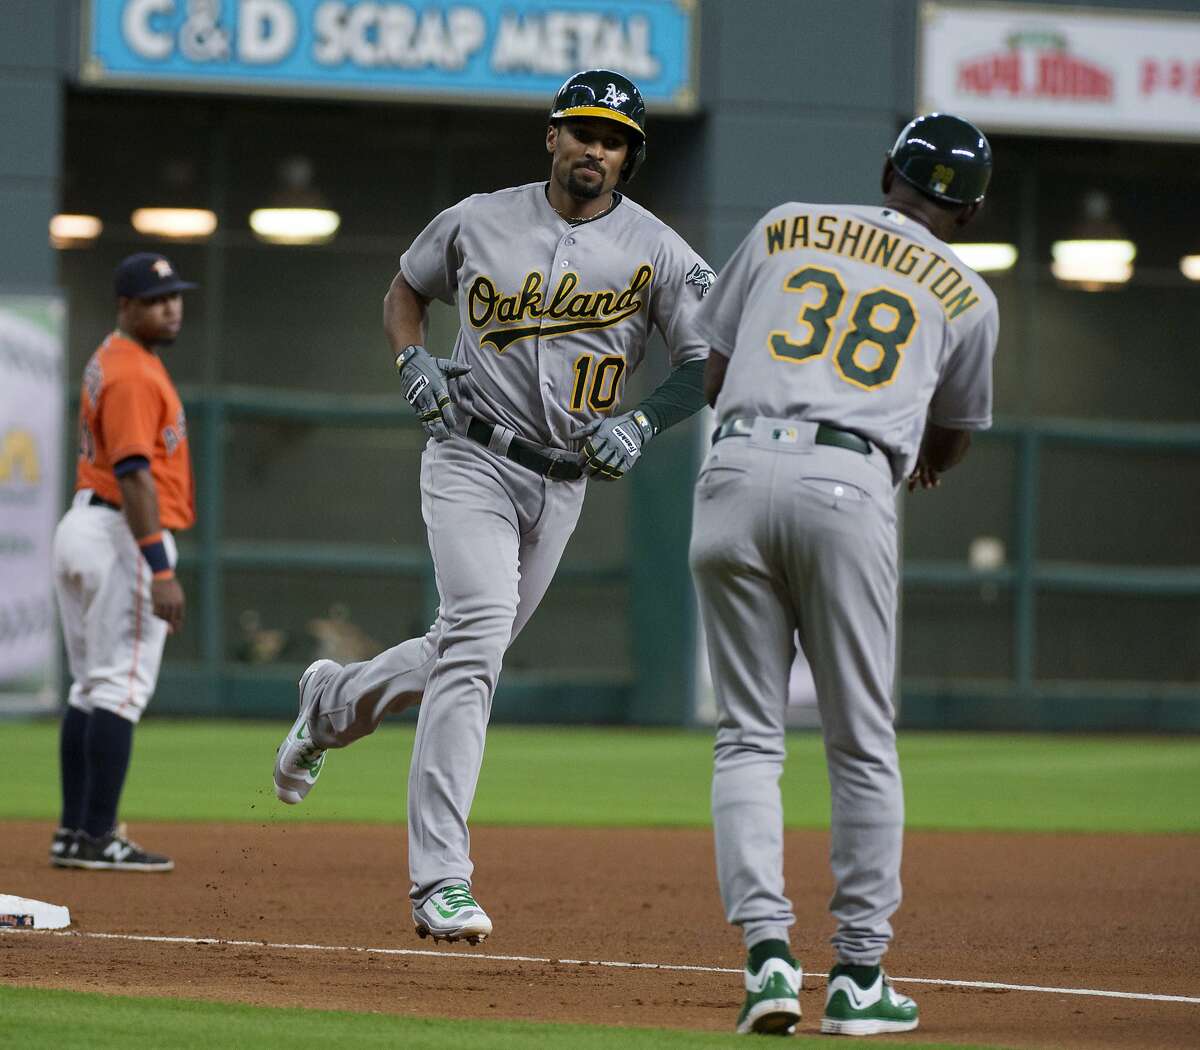 Oakland Athletics' Marcus Semien (10) is congratulated by third base coach Ron Washington (38) after hitting a home run against the Houston Astros in the fourth inning of a baseball game Friday, July 8, 2016, in Houston. (AP Photo/George Bridges)